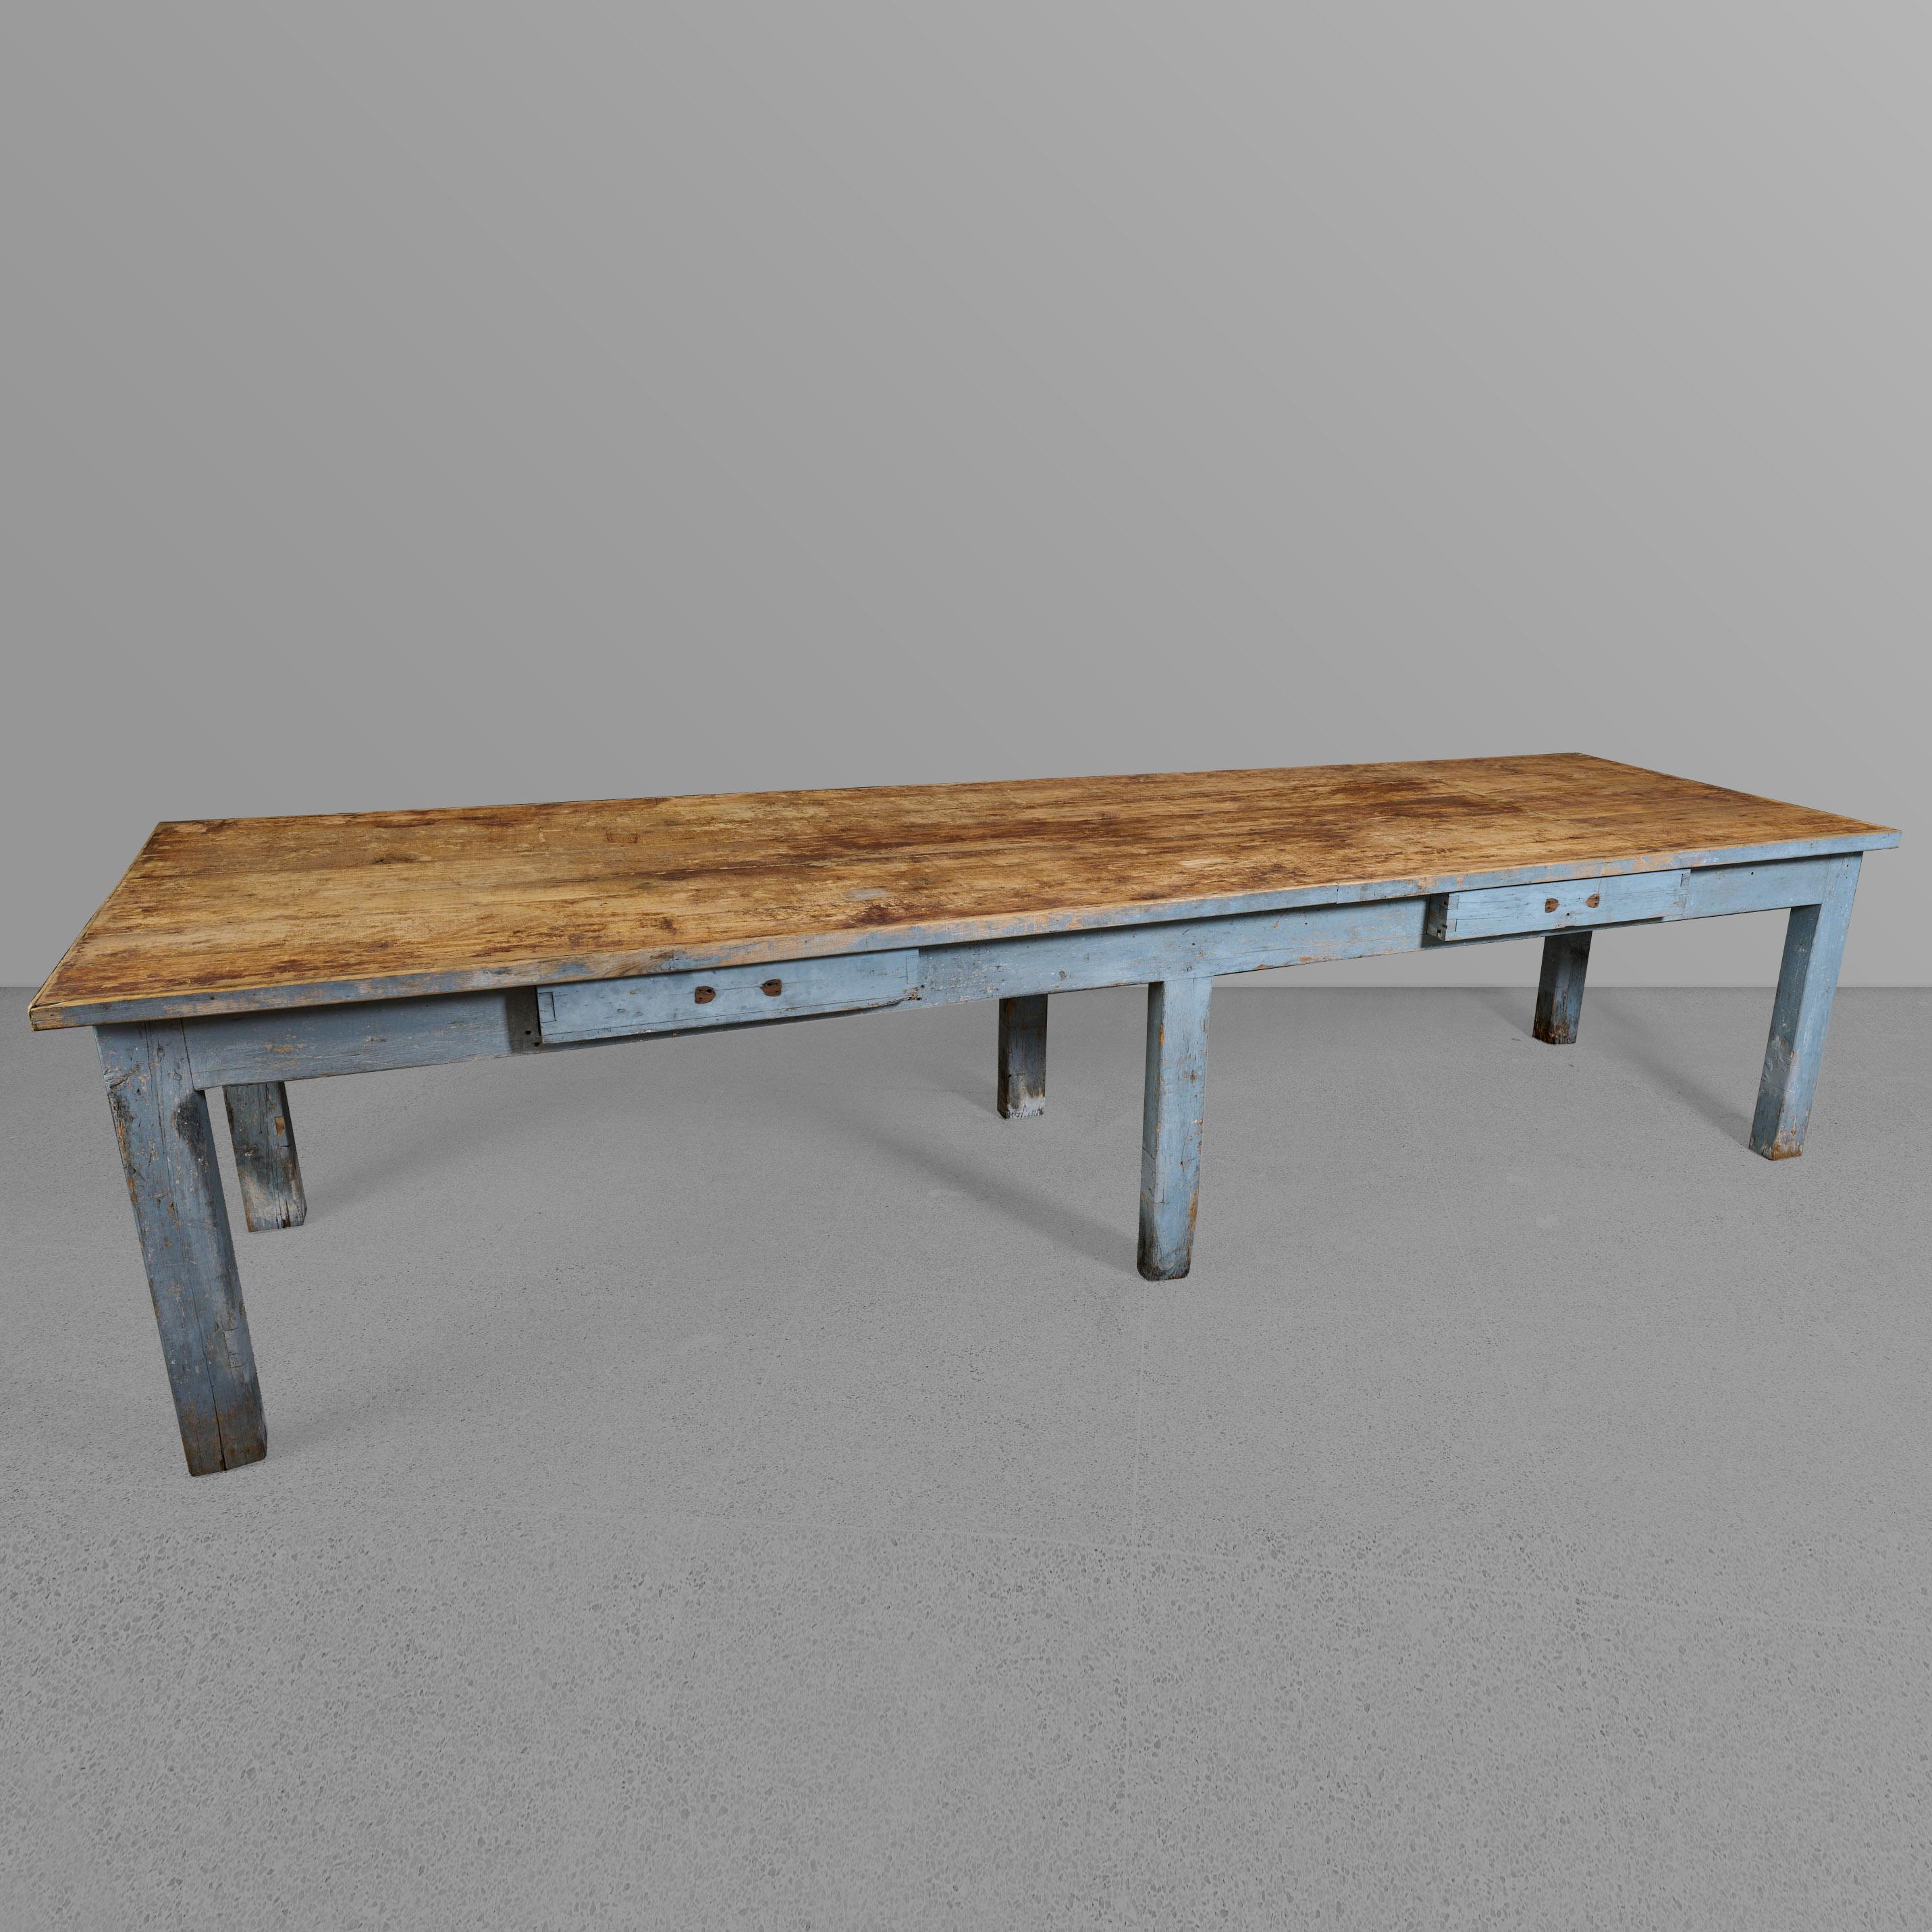 Six leg table with drawers. Wonderful natural wood top with blue painted base.

